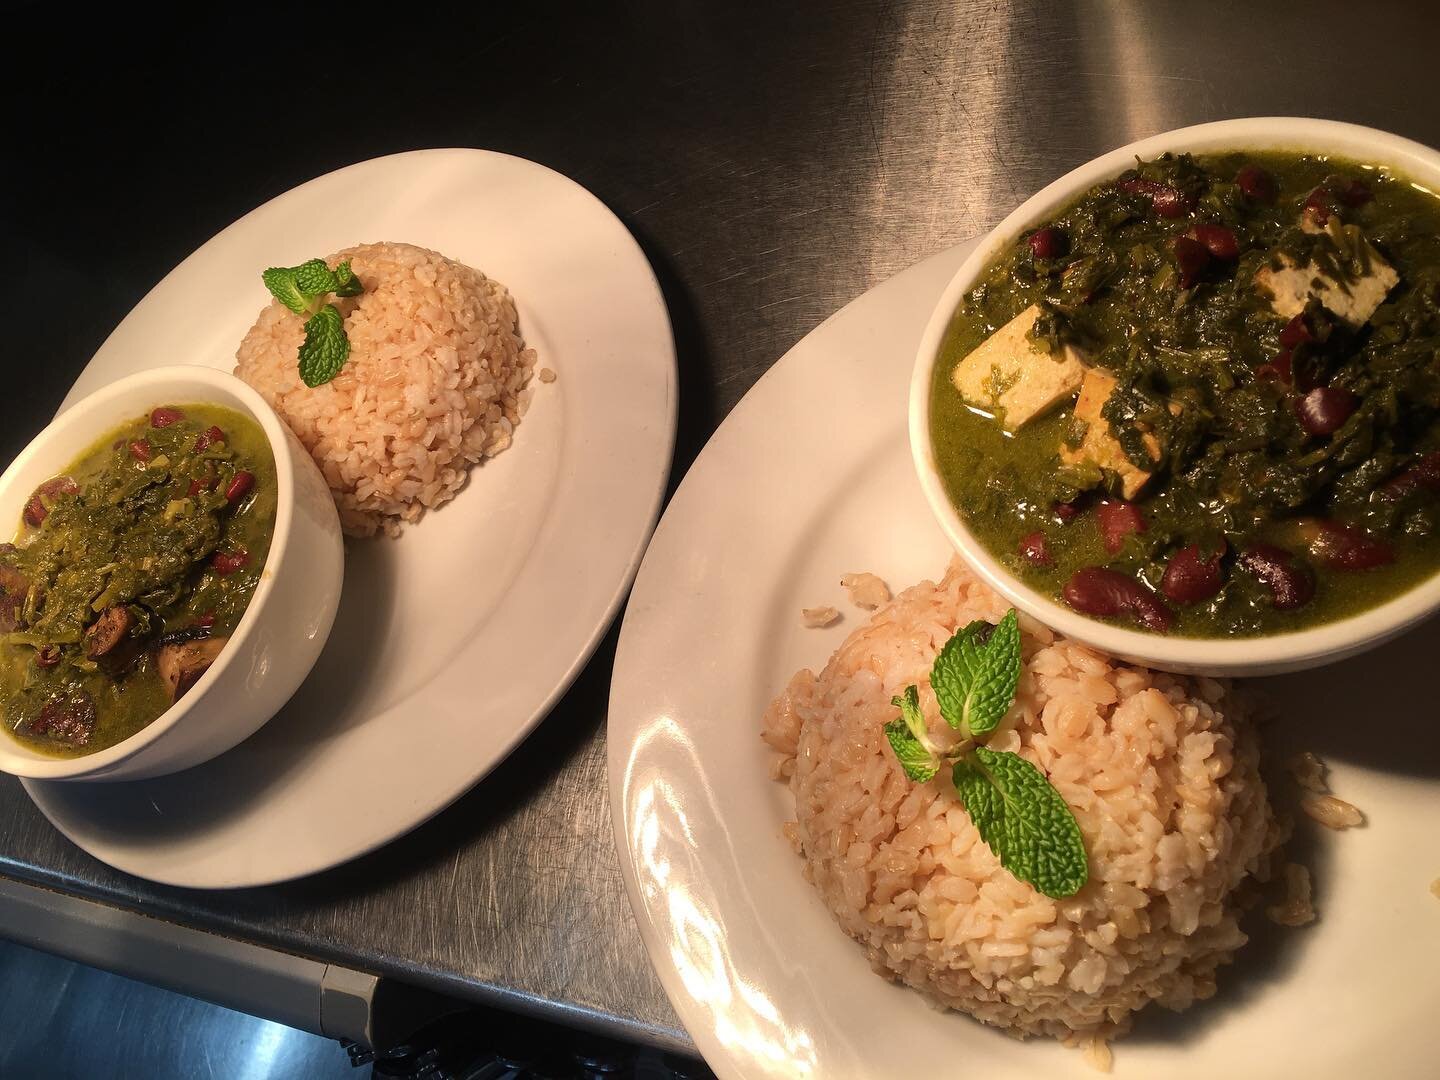 Delicious Ghormeh Sabzi made with lots of greens and a choice of Tofu or Portobello 🥬